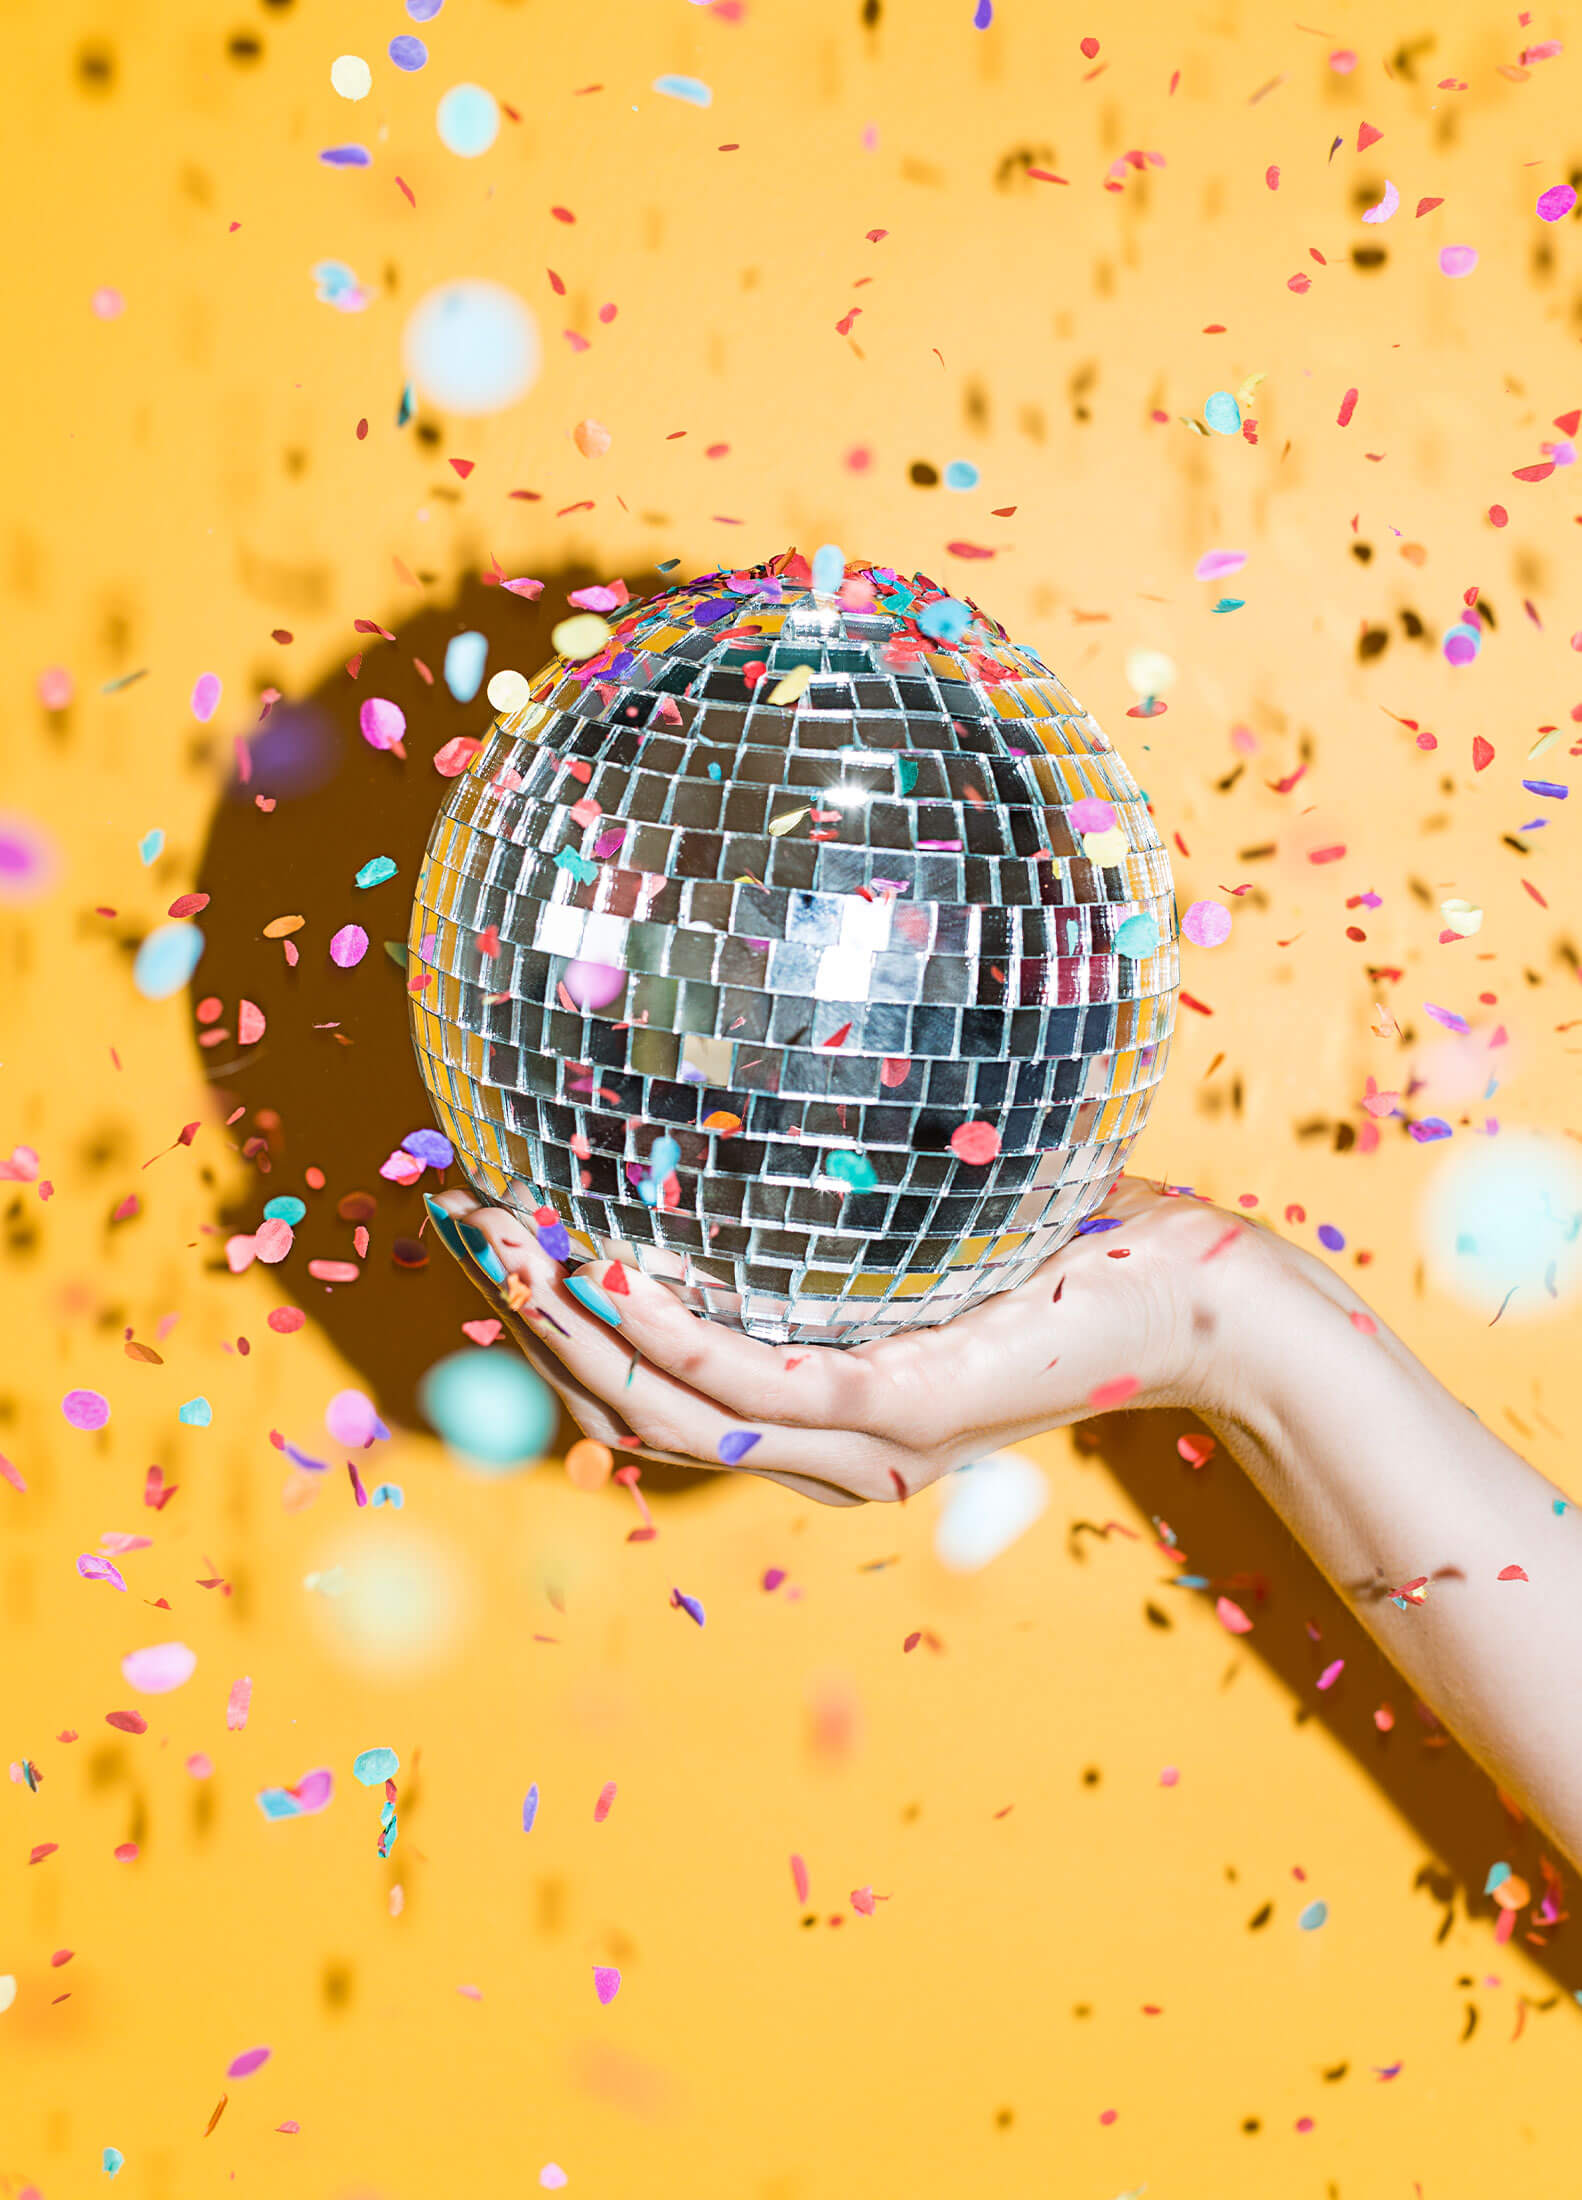 Isolated hand holding a disco ball in front of a bright yellow background